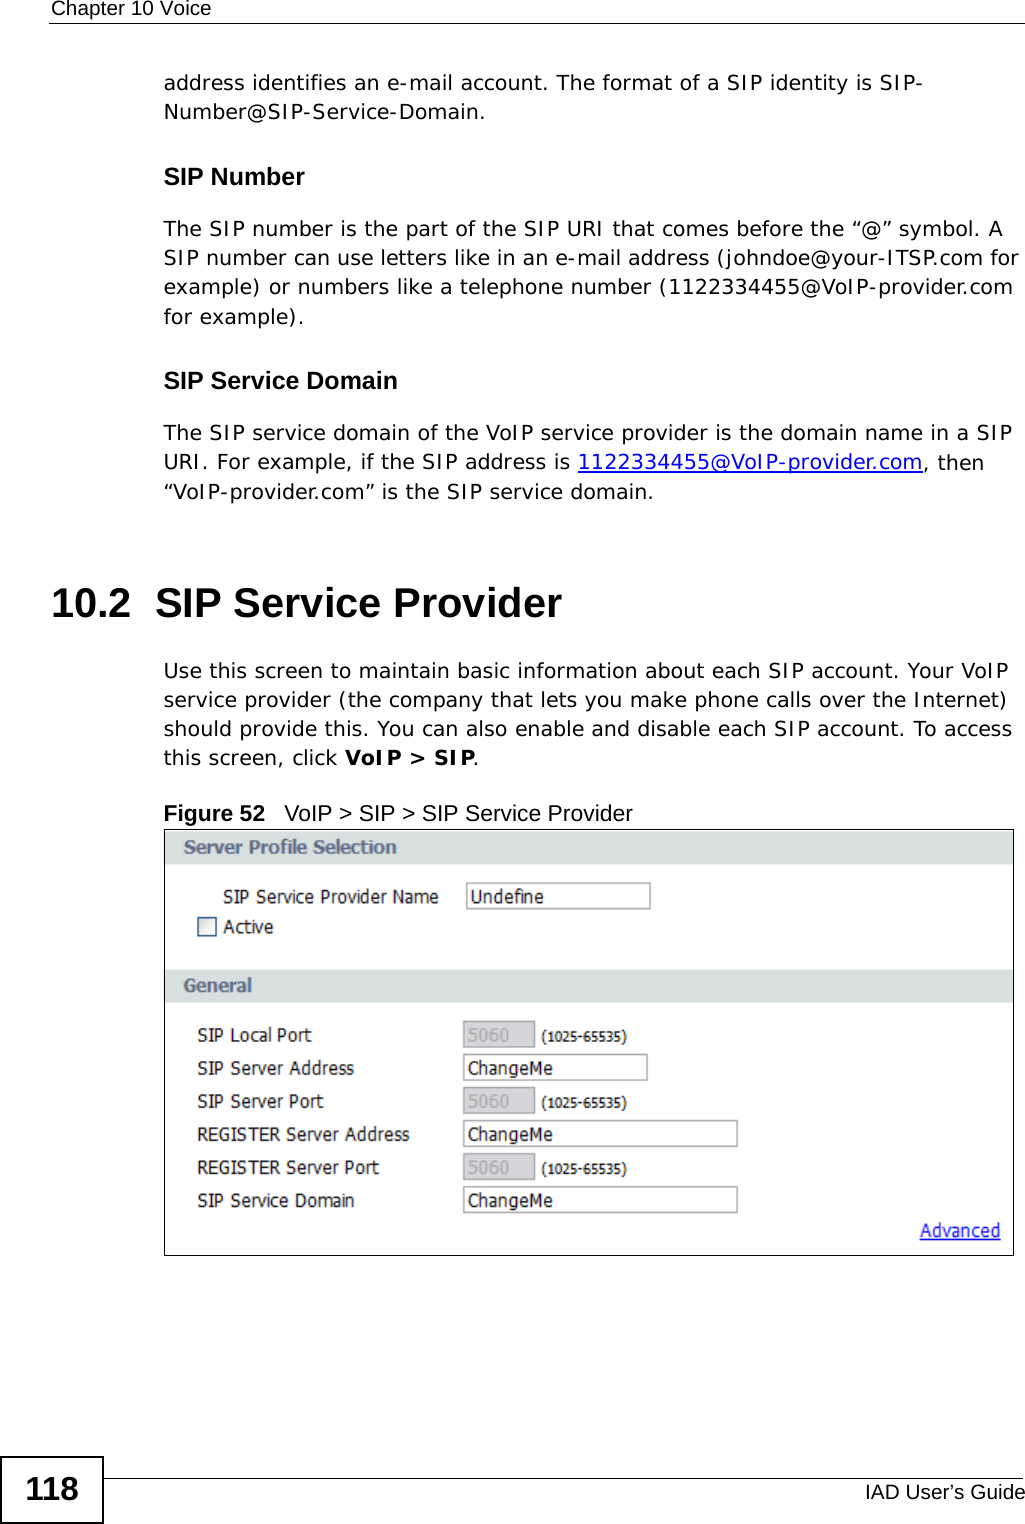 Chapter 10 VoiceIAD User’s Guide118address identifies an e-mail account. The format of a SIP identity is SIP-Number@SIP-Service-Domain.SIP NumberThe SIP number is the part of the SIP URI that comes before the “@” symbol. A SIP number can use letters like in an e-mail address (johndoe@your-ITSP.com for example) or numbers like a telephone number (1122334455@VoIP-provider.com for example).SIP Service DomainThe SIP service domain of the VoIP service provider is the domain name in a SIP URI. For example, if the SIP address is 1122334455@VoIP-provider.com, then “VoIP-provider.com” is the SIP service domain.10.2  SIP Service ProviderUse this screen to maintain basic information about each SIP account. Your VoIP service provider (the company that lets you make phone calls over the Internet) should provide this. You can also enable and disable each SIP account. To access this screen, click VoIP &gt; SIP.Figure 52   VoIP &gt; SIP &gt; SIP Service Provider